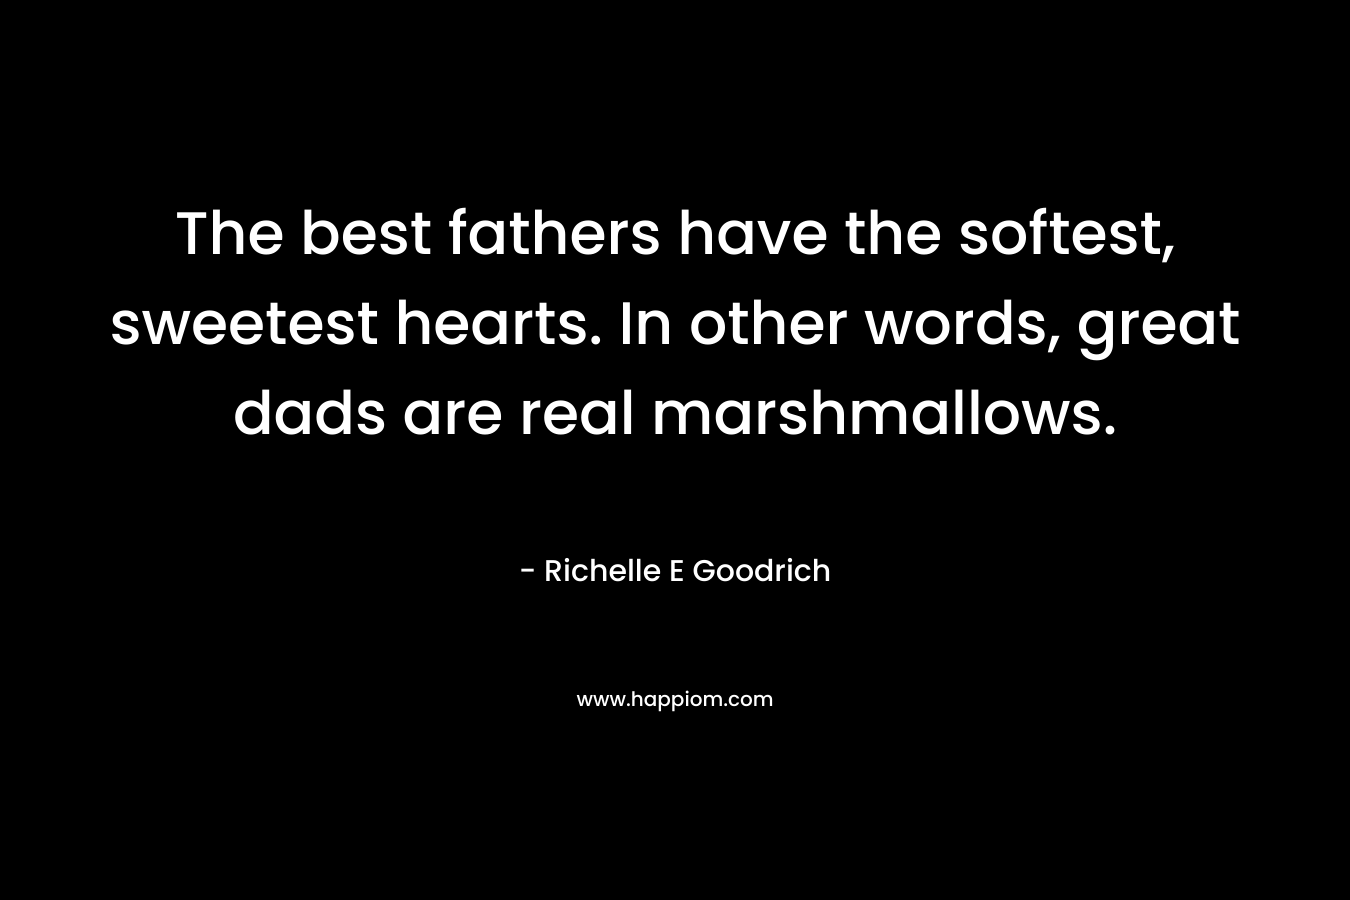 The best fathers have the softest, sweetest hearts. In other words, great dads are real marshmallows.